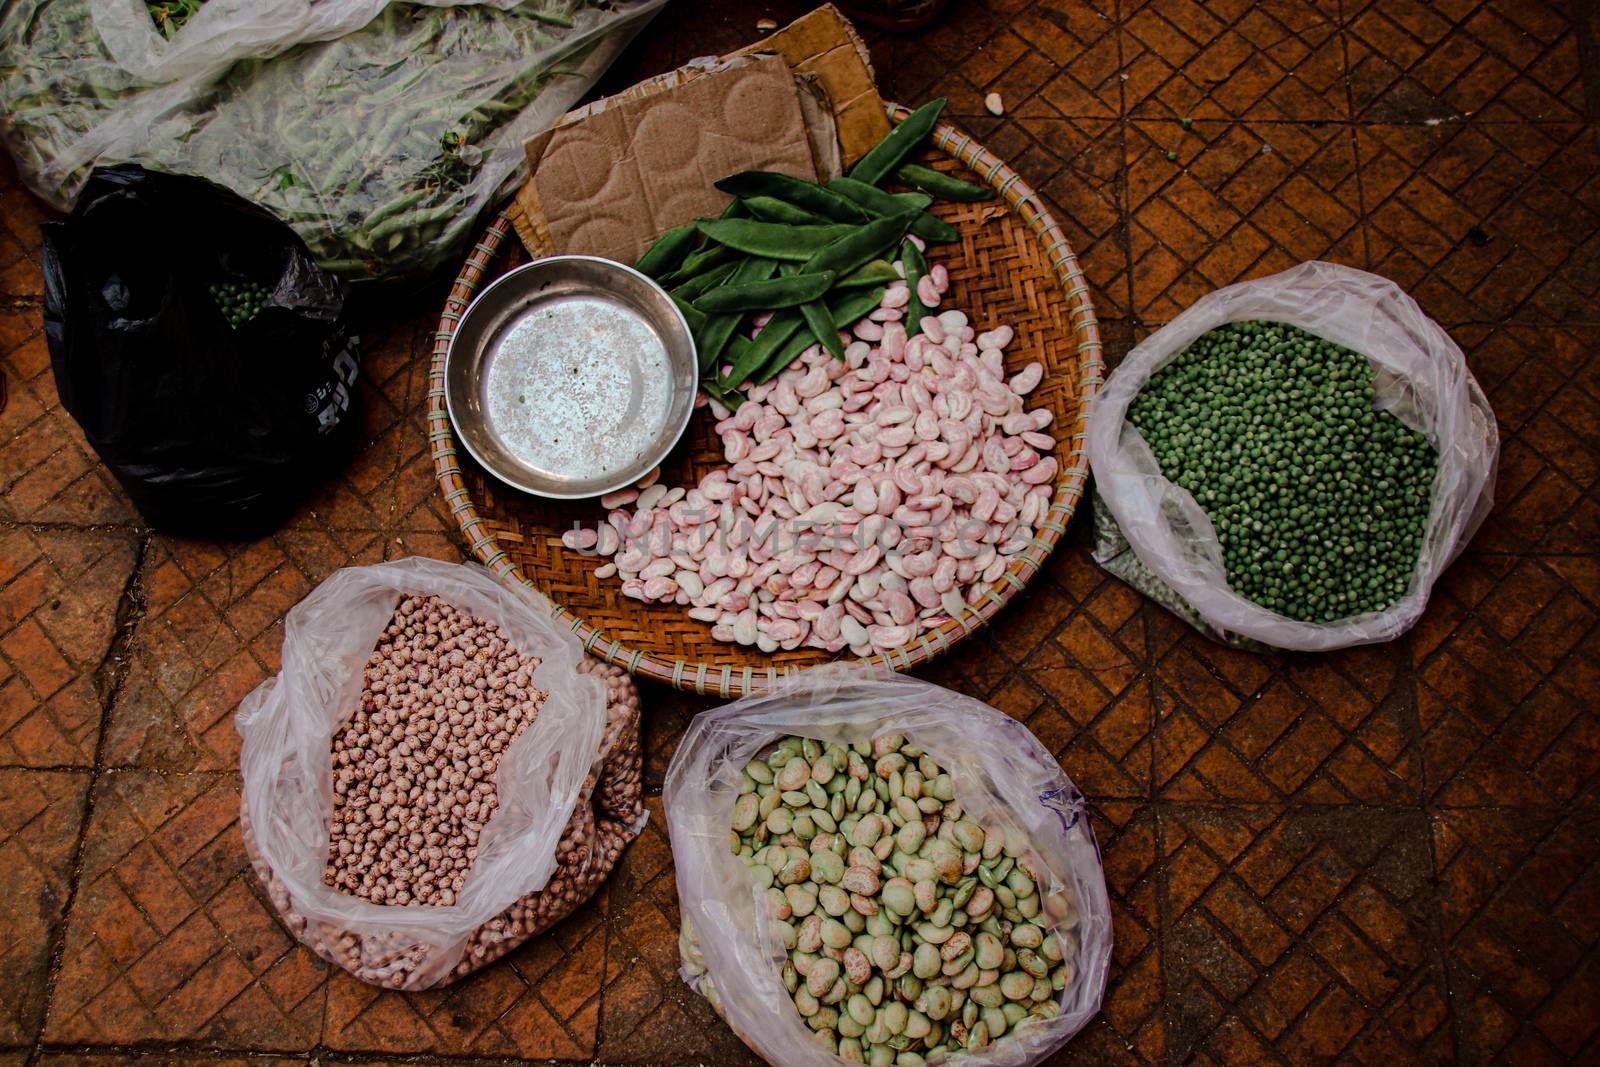 Beans and peas sold in the traditional local street market in Danang Vietnam that shows the authentic lifestyle and local culture of the country